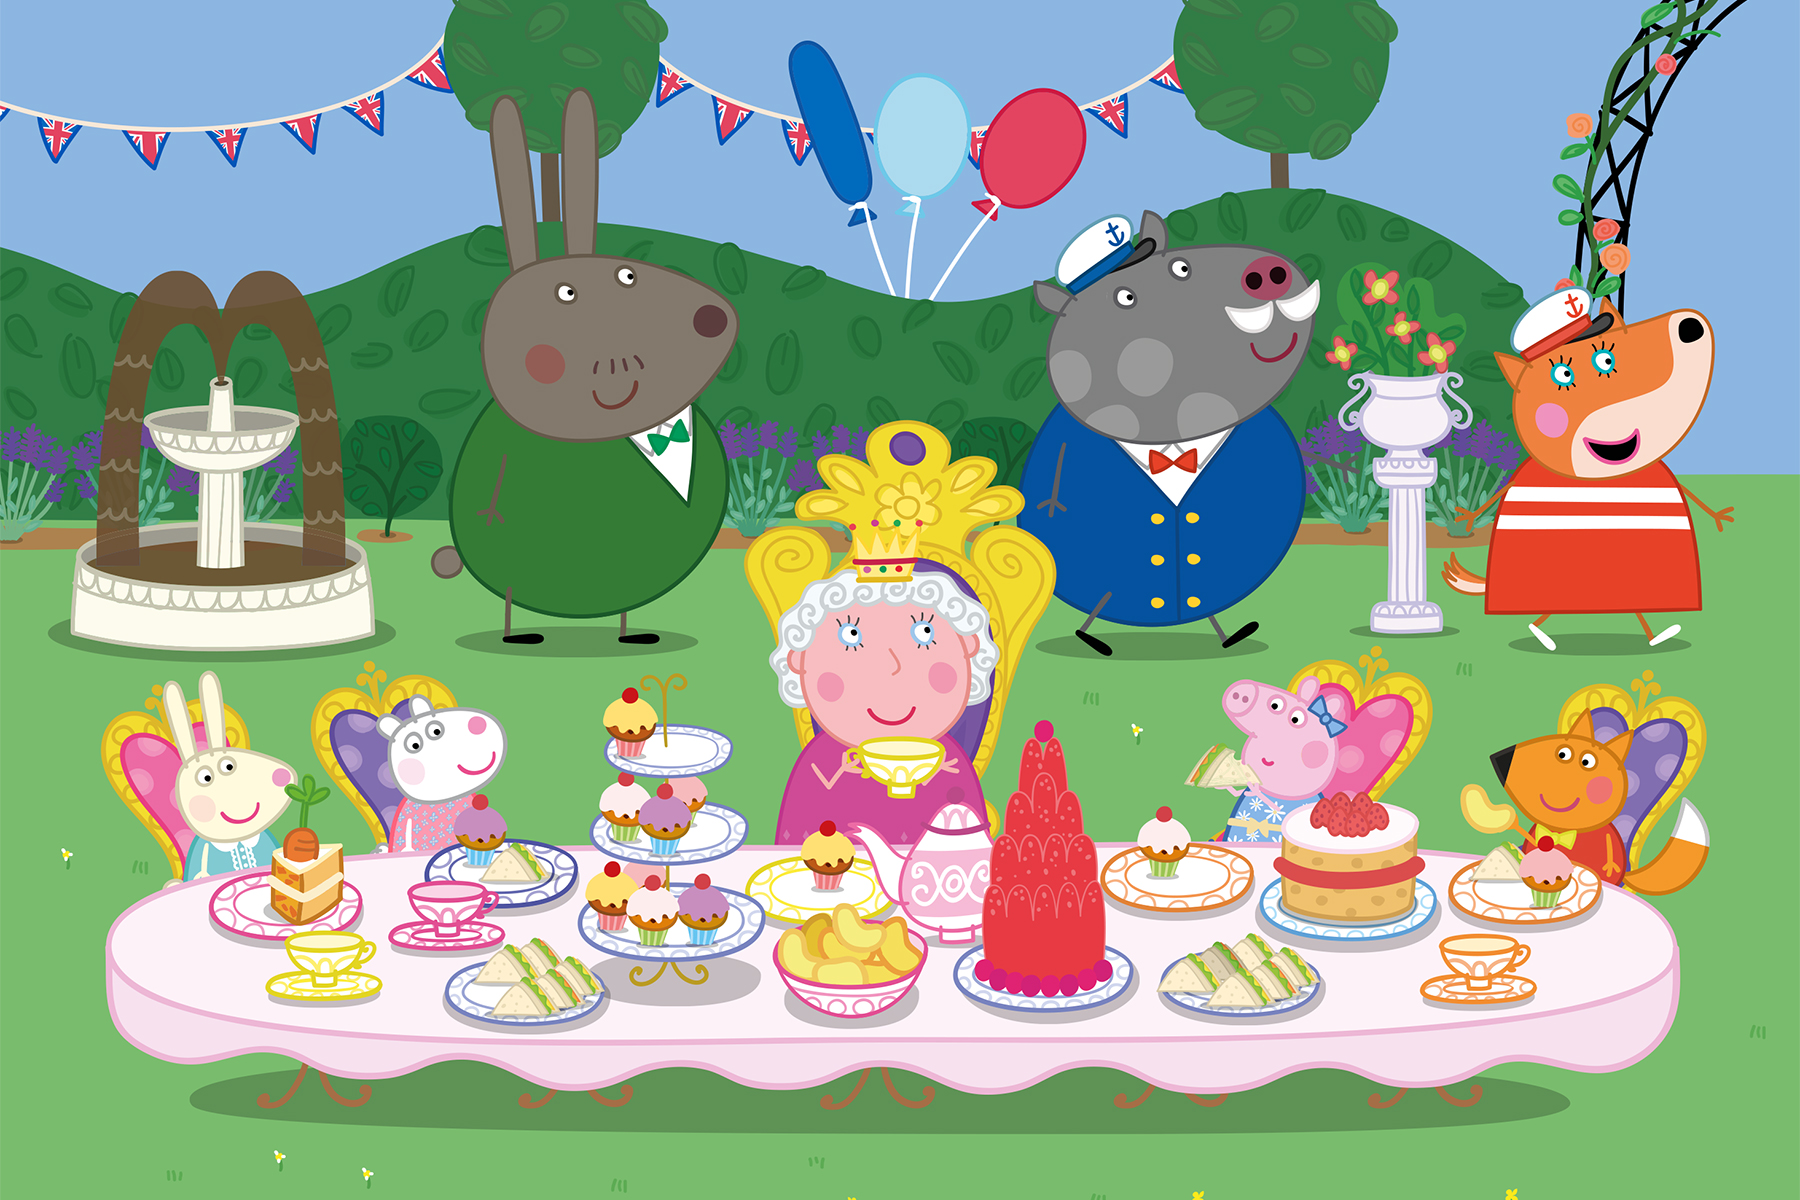 An illustration from Peppa's Royal Party that shows Peppa and her friends sitting with the Queen in her garden enjoying an afternoon tea